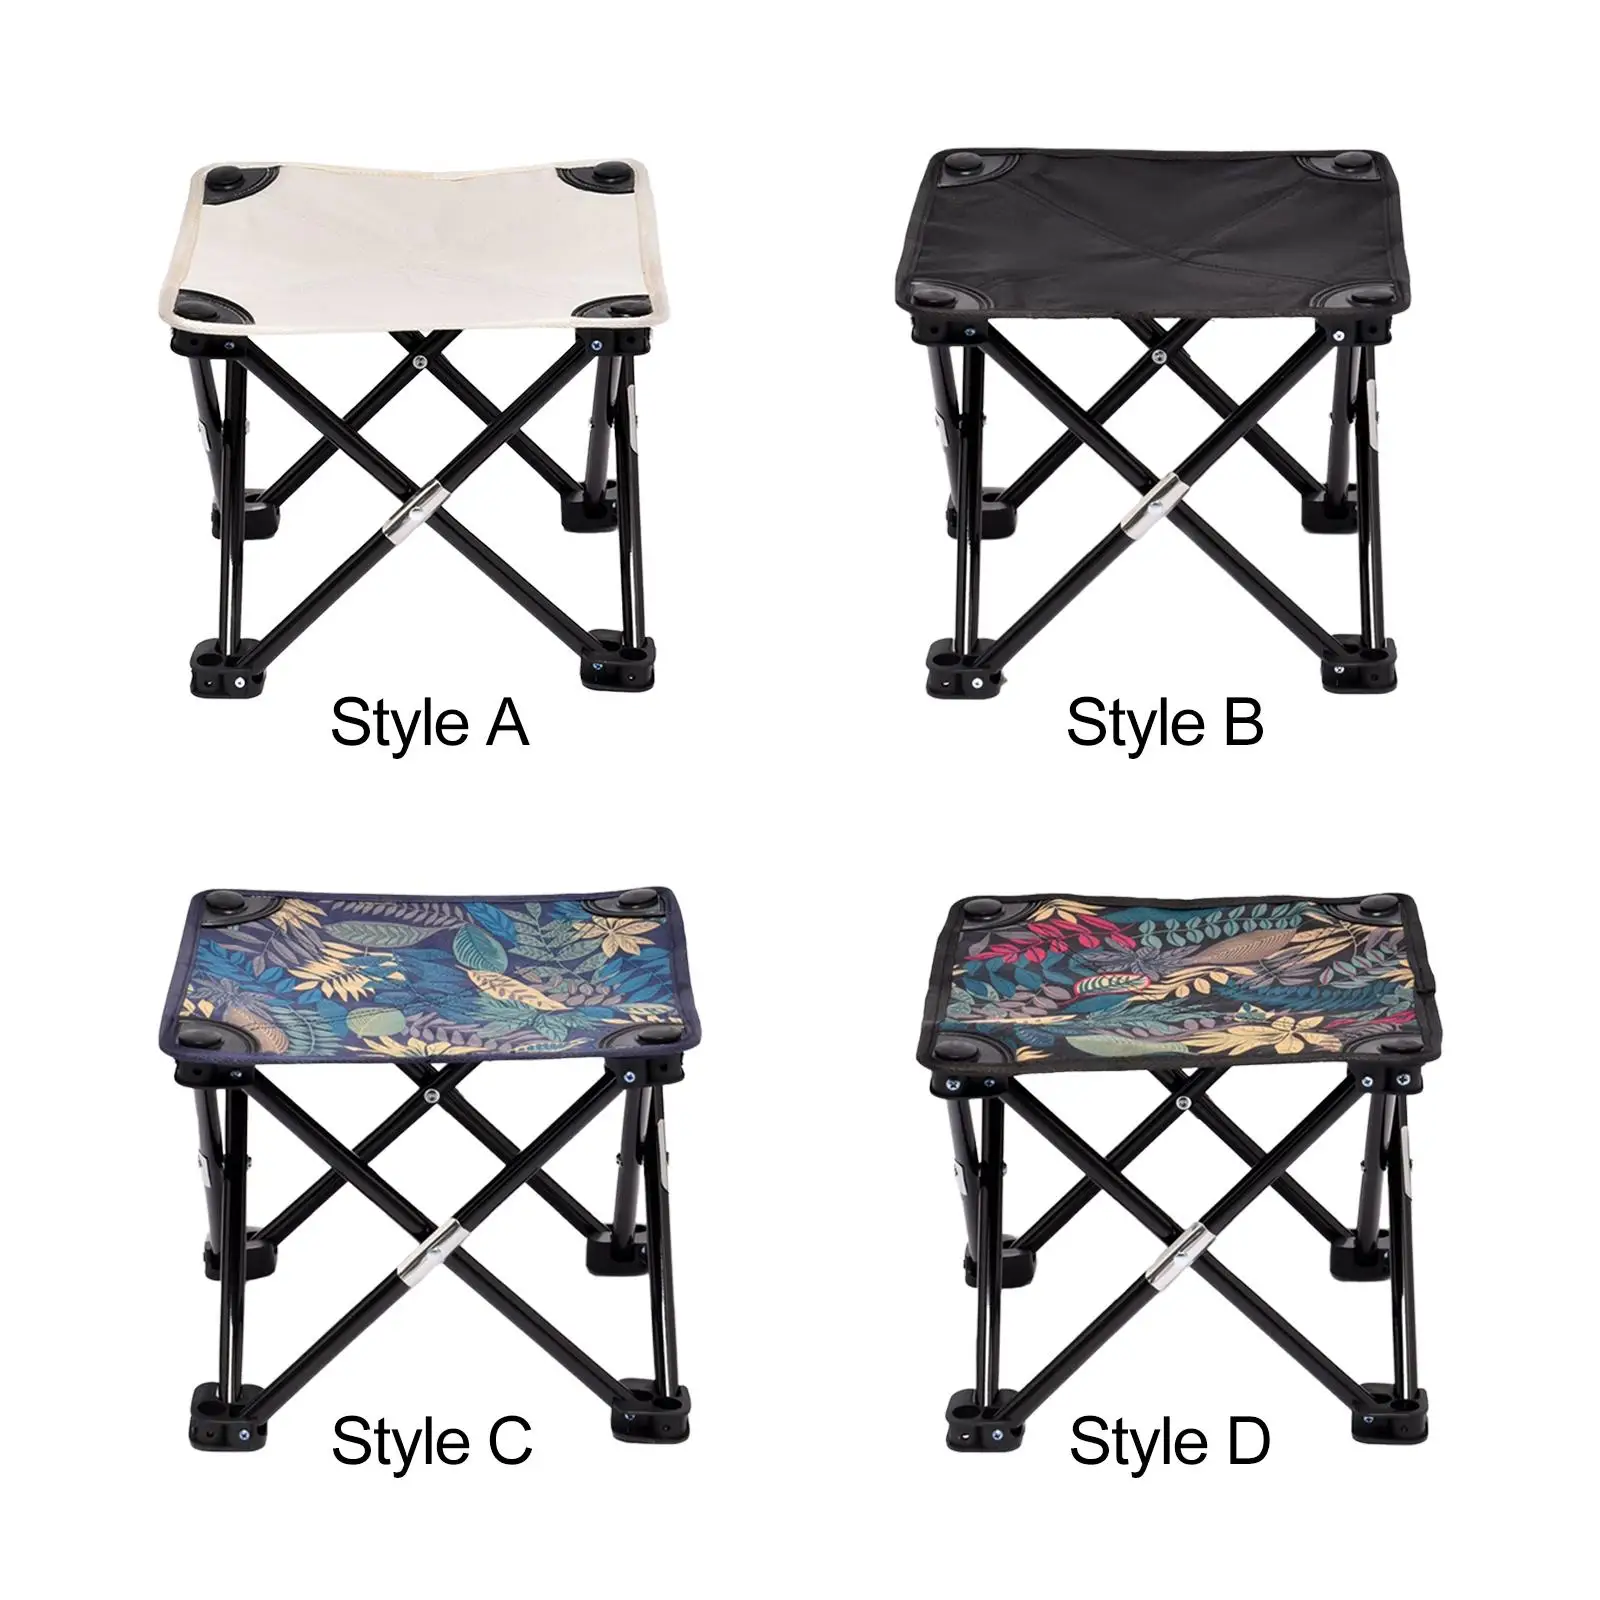 Foldable Footstool Wear Resistant recliner Foot Rest Camp Stool Saddle Chair for Walking Hiking Lounge Picnic Patio Traveling